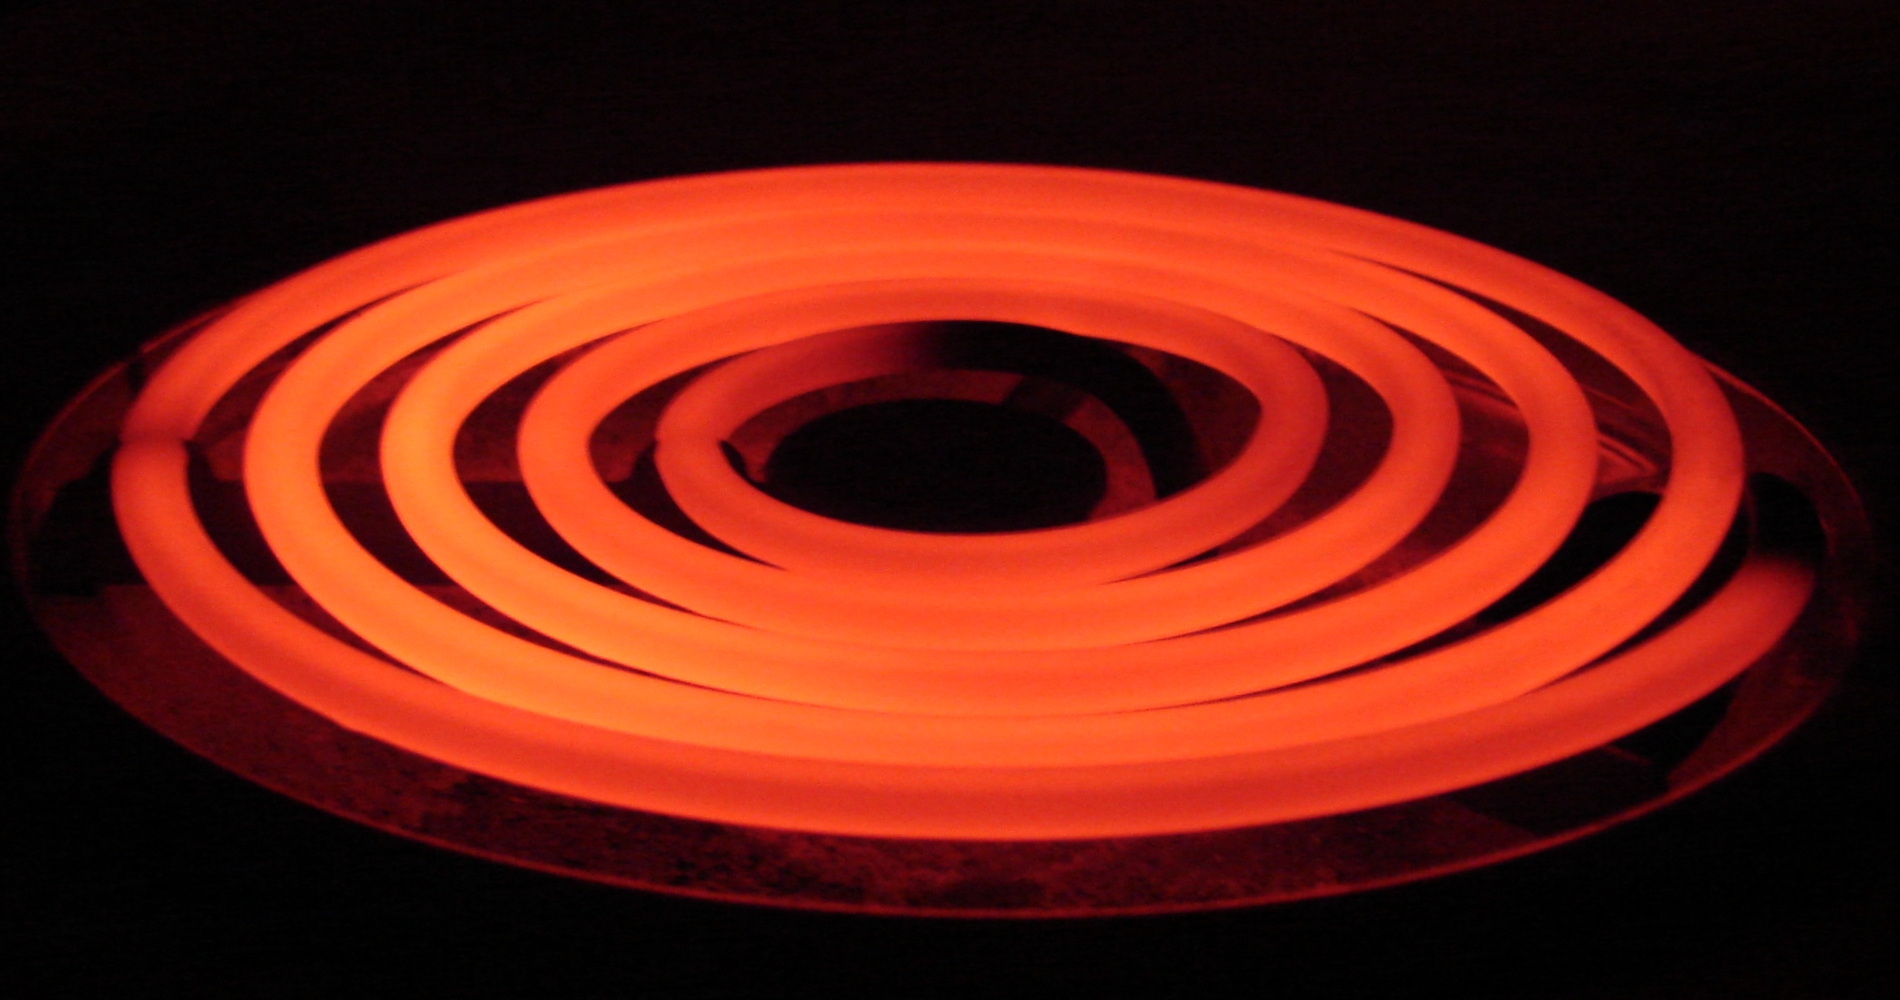 Red_Hot_Coiled_Stove_Burner_4_by_Fantasy